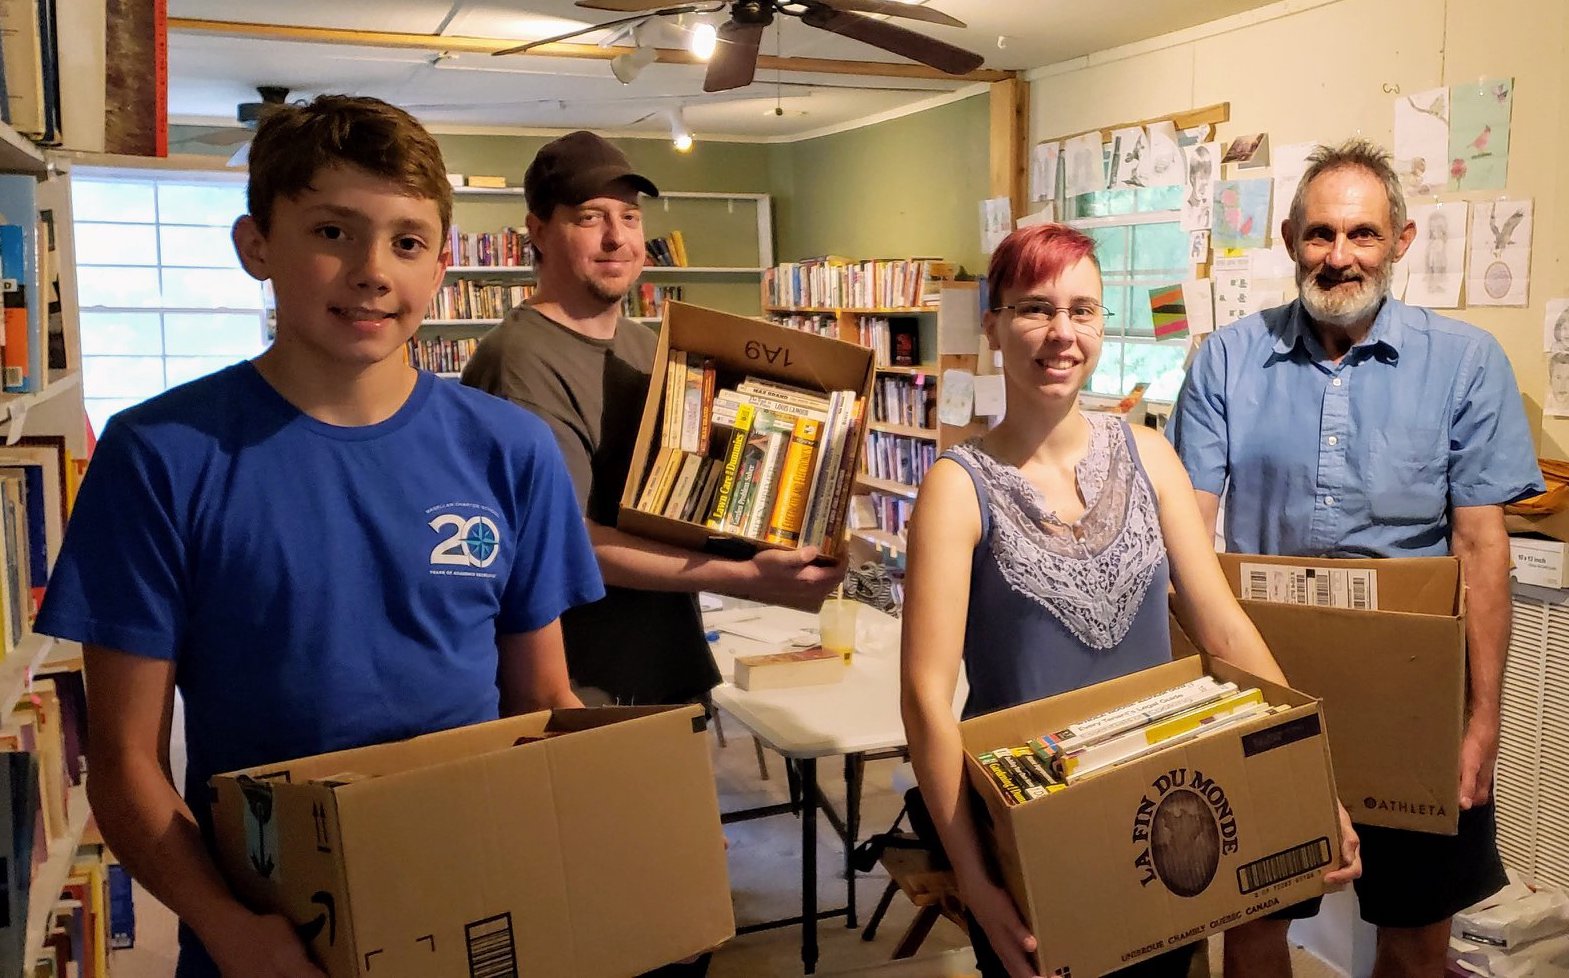 Volunteers showing off boxes of donated books.